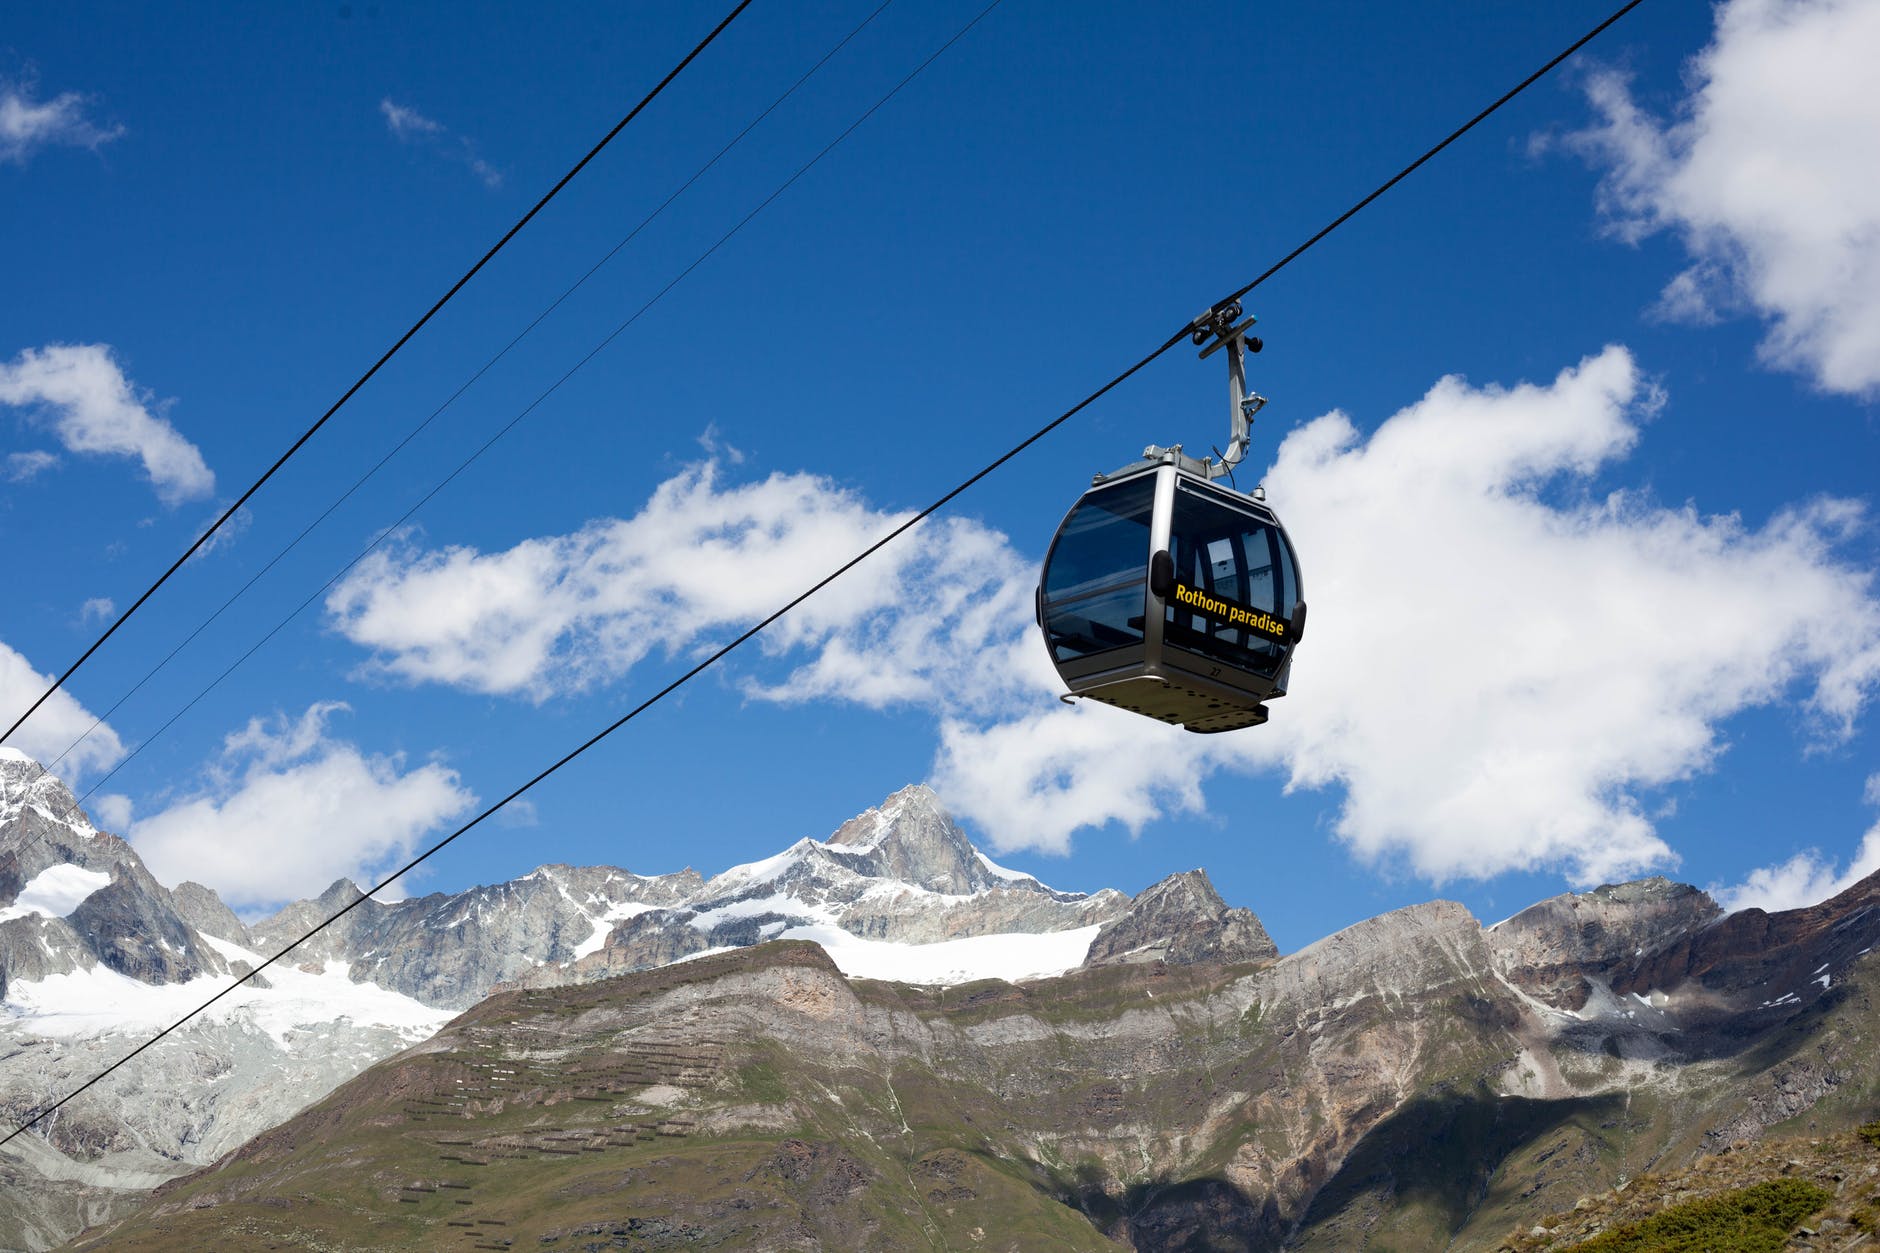 Boulder’s long-sought gondola elicits giggles and groans, but study shows it’s seriously doable